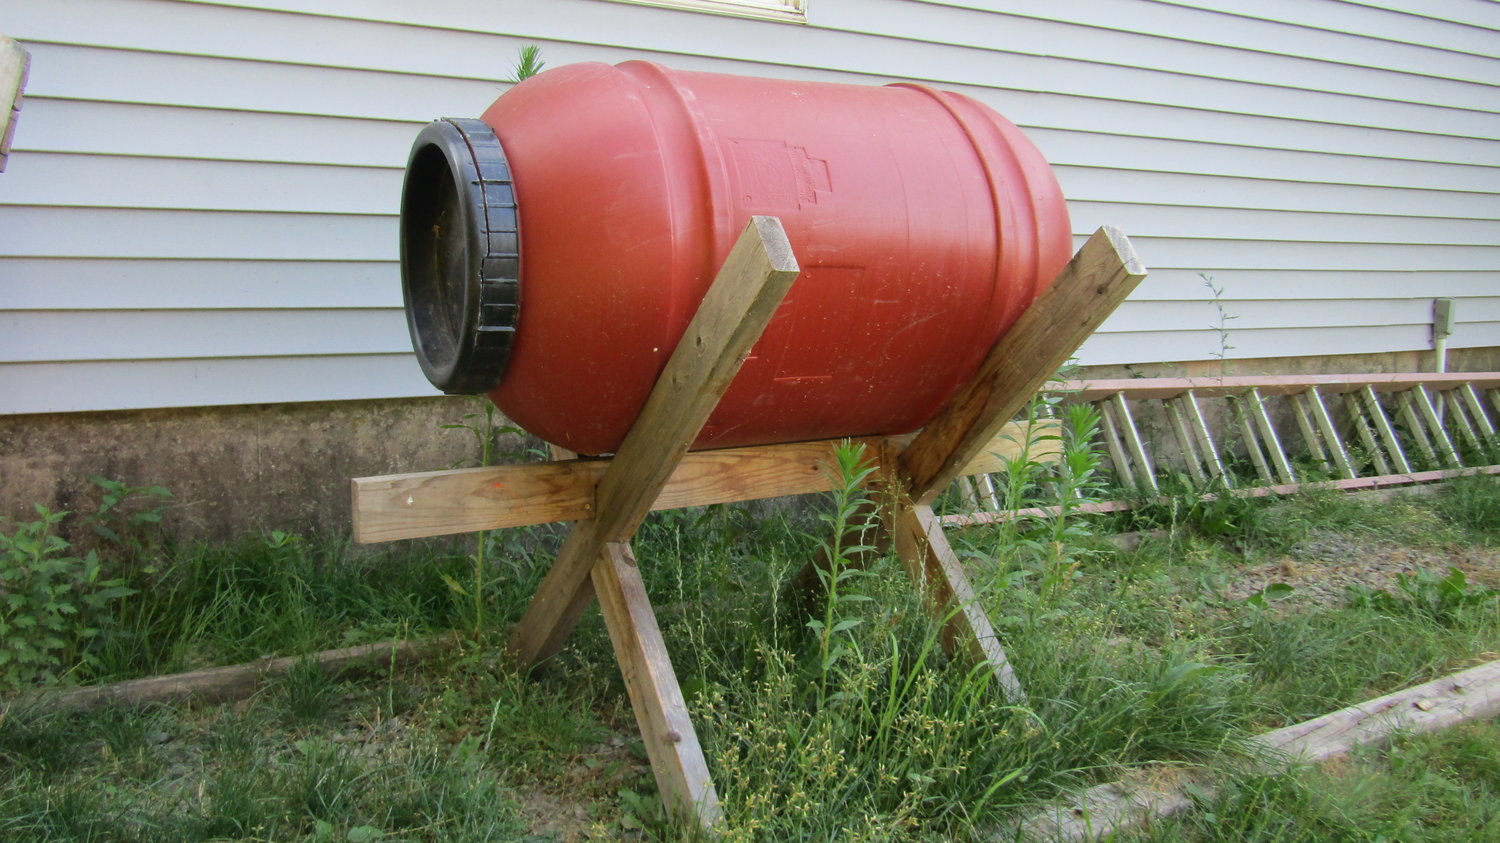 My homemade composting barrel mounted on a stand to turn over the soil inside with ease.